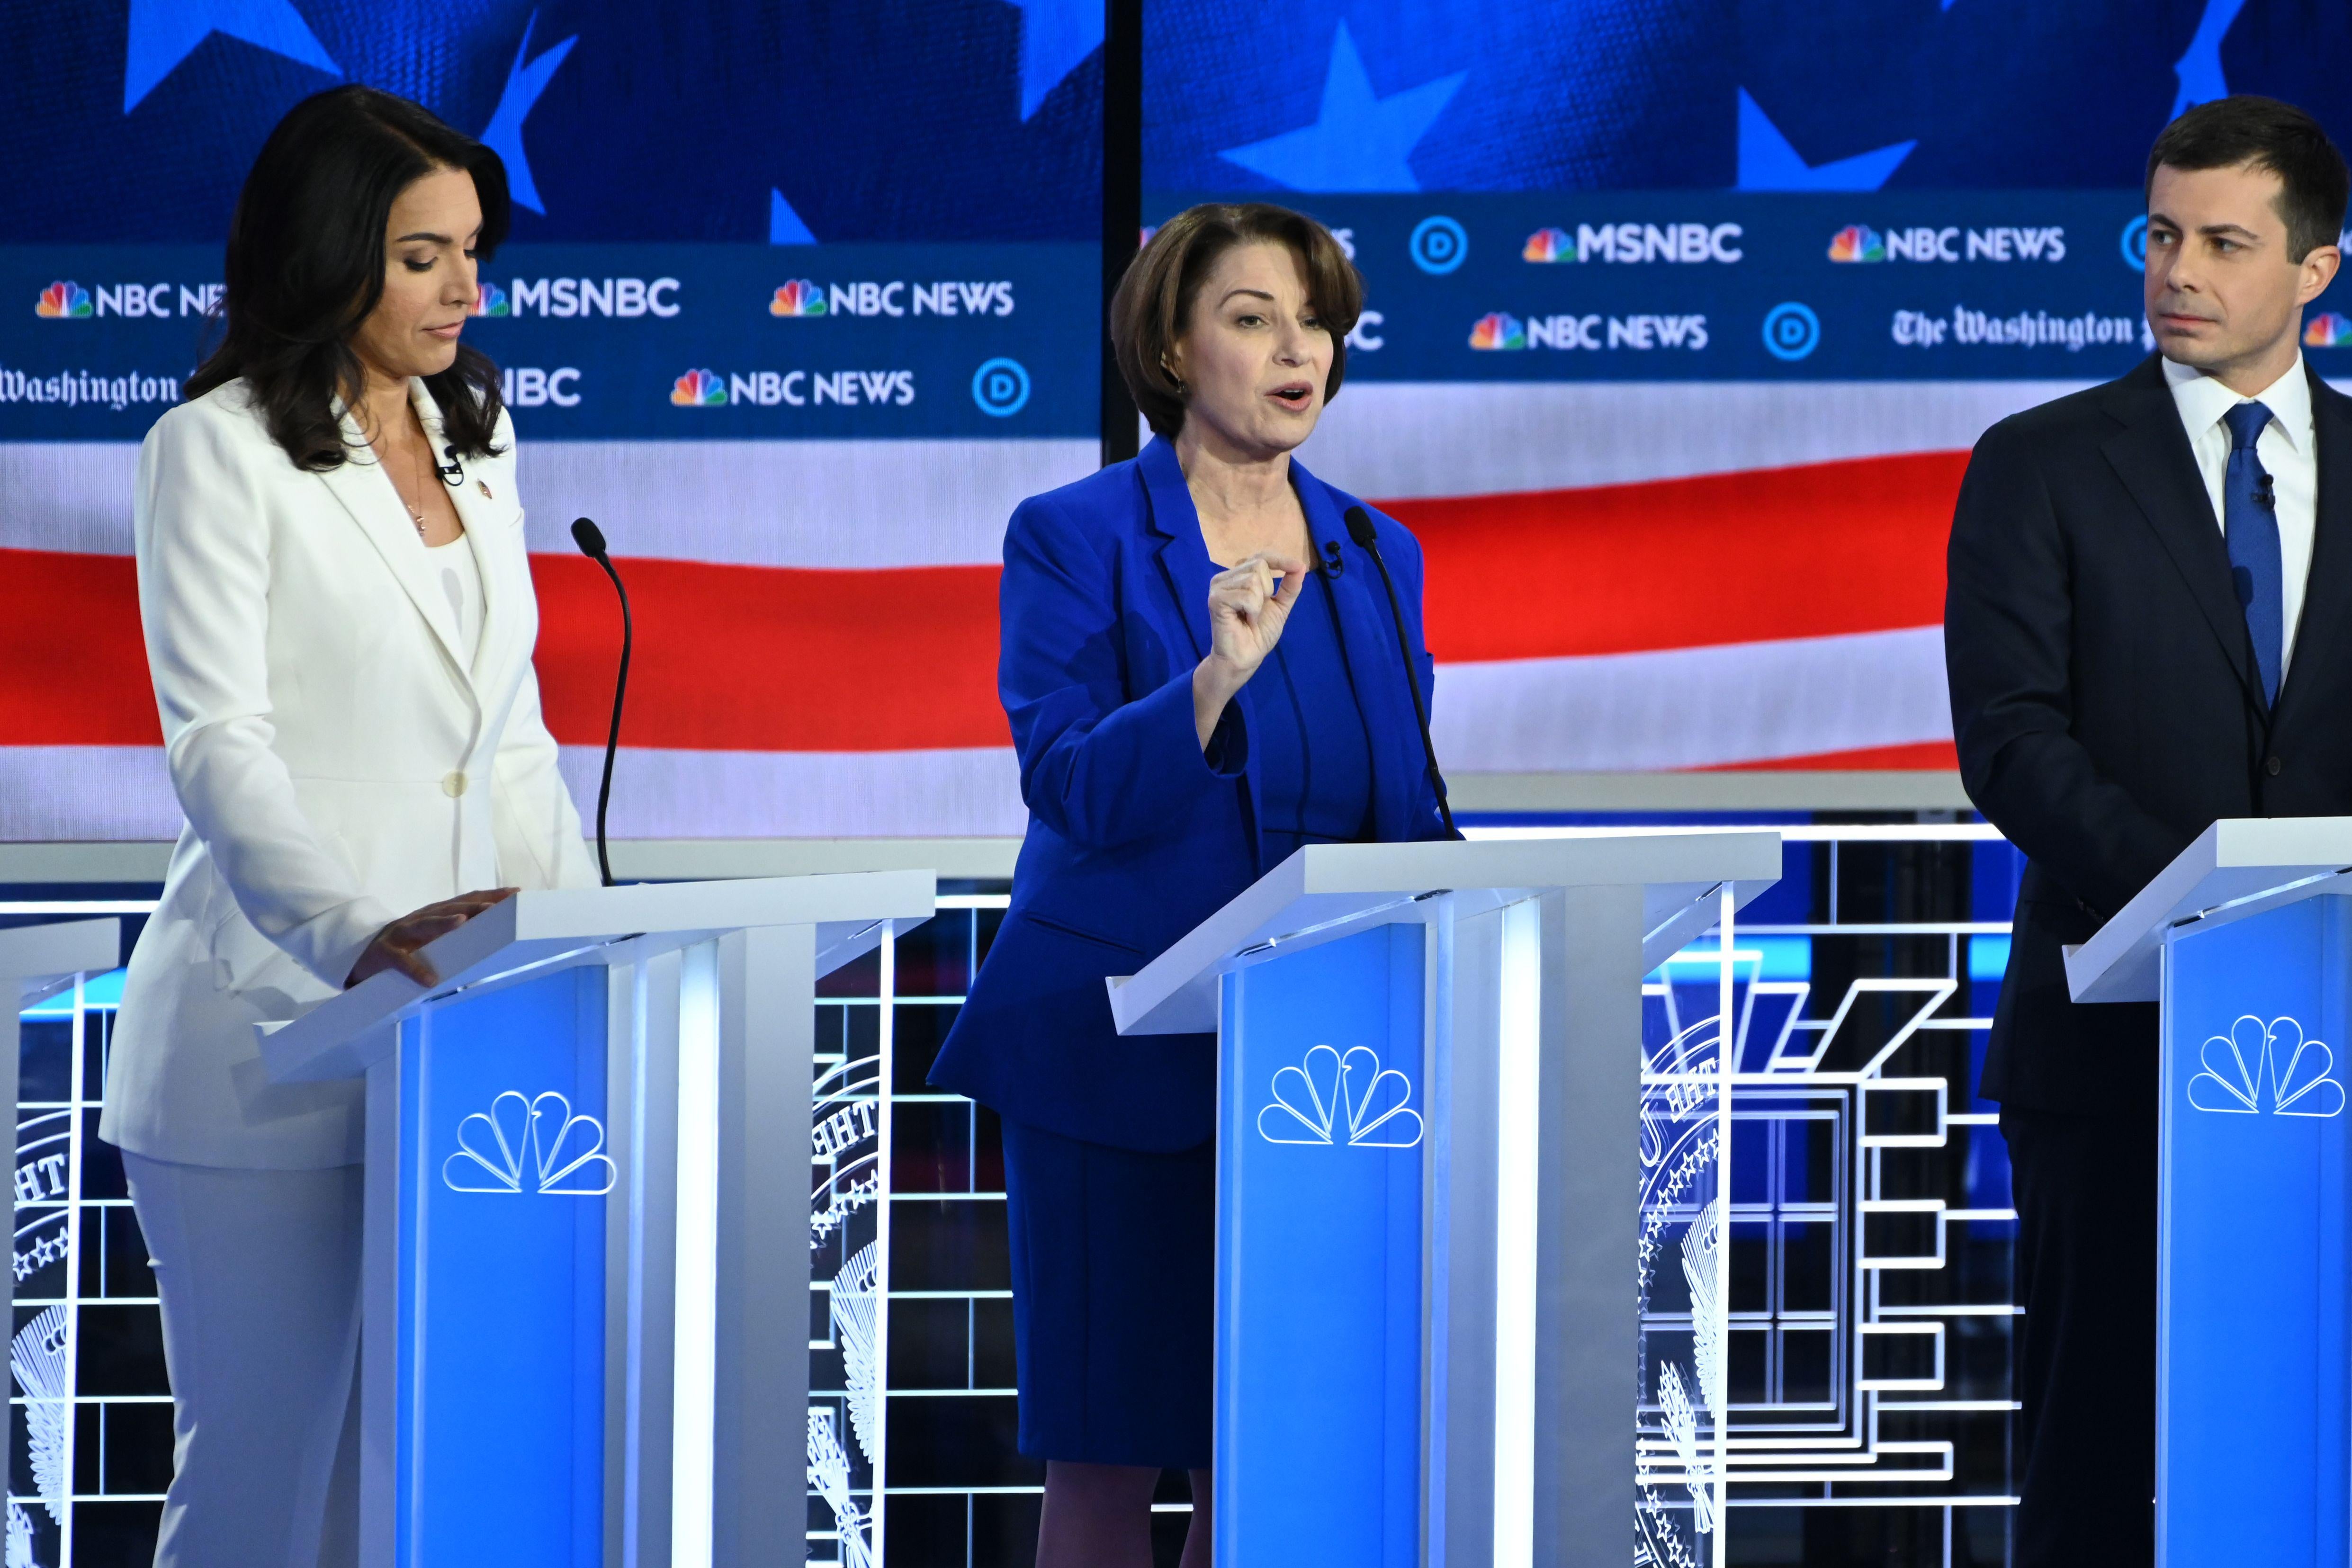 Democratic presidential hopefuls Representative for Hawaii Tulsi Gabbard (L), Minnesota Senator Amy Klobuchar (C) and Mayor of South Bend, Indiana, Pete Buttigieg (R) participate in the fifth Democratic primary debate of the 2020 presidential campaign season co-hosted by MSNBC and The Washington Post at Tyler Perry Studios in Atlanta, Georgia on November 20, 2019. (Photo by SAUL LOEB / AFP) (Photo by SAUL LOEB/AFP via Getty Images)